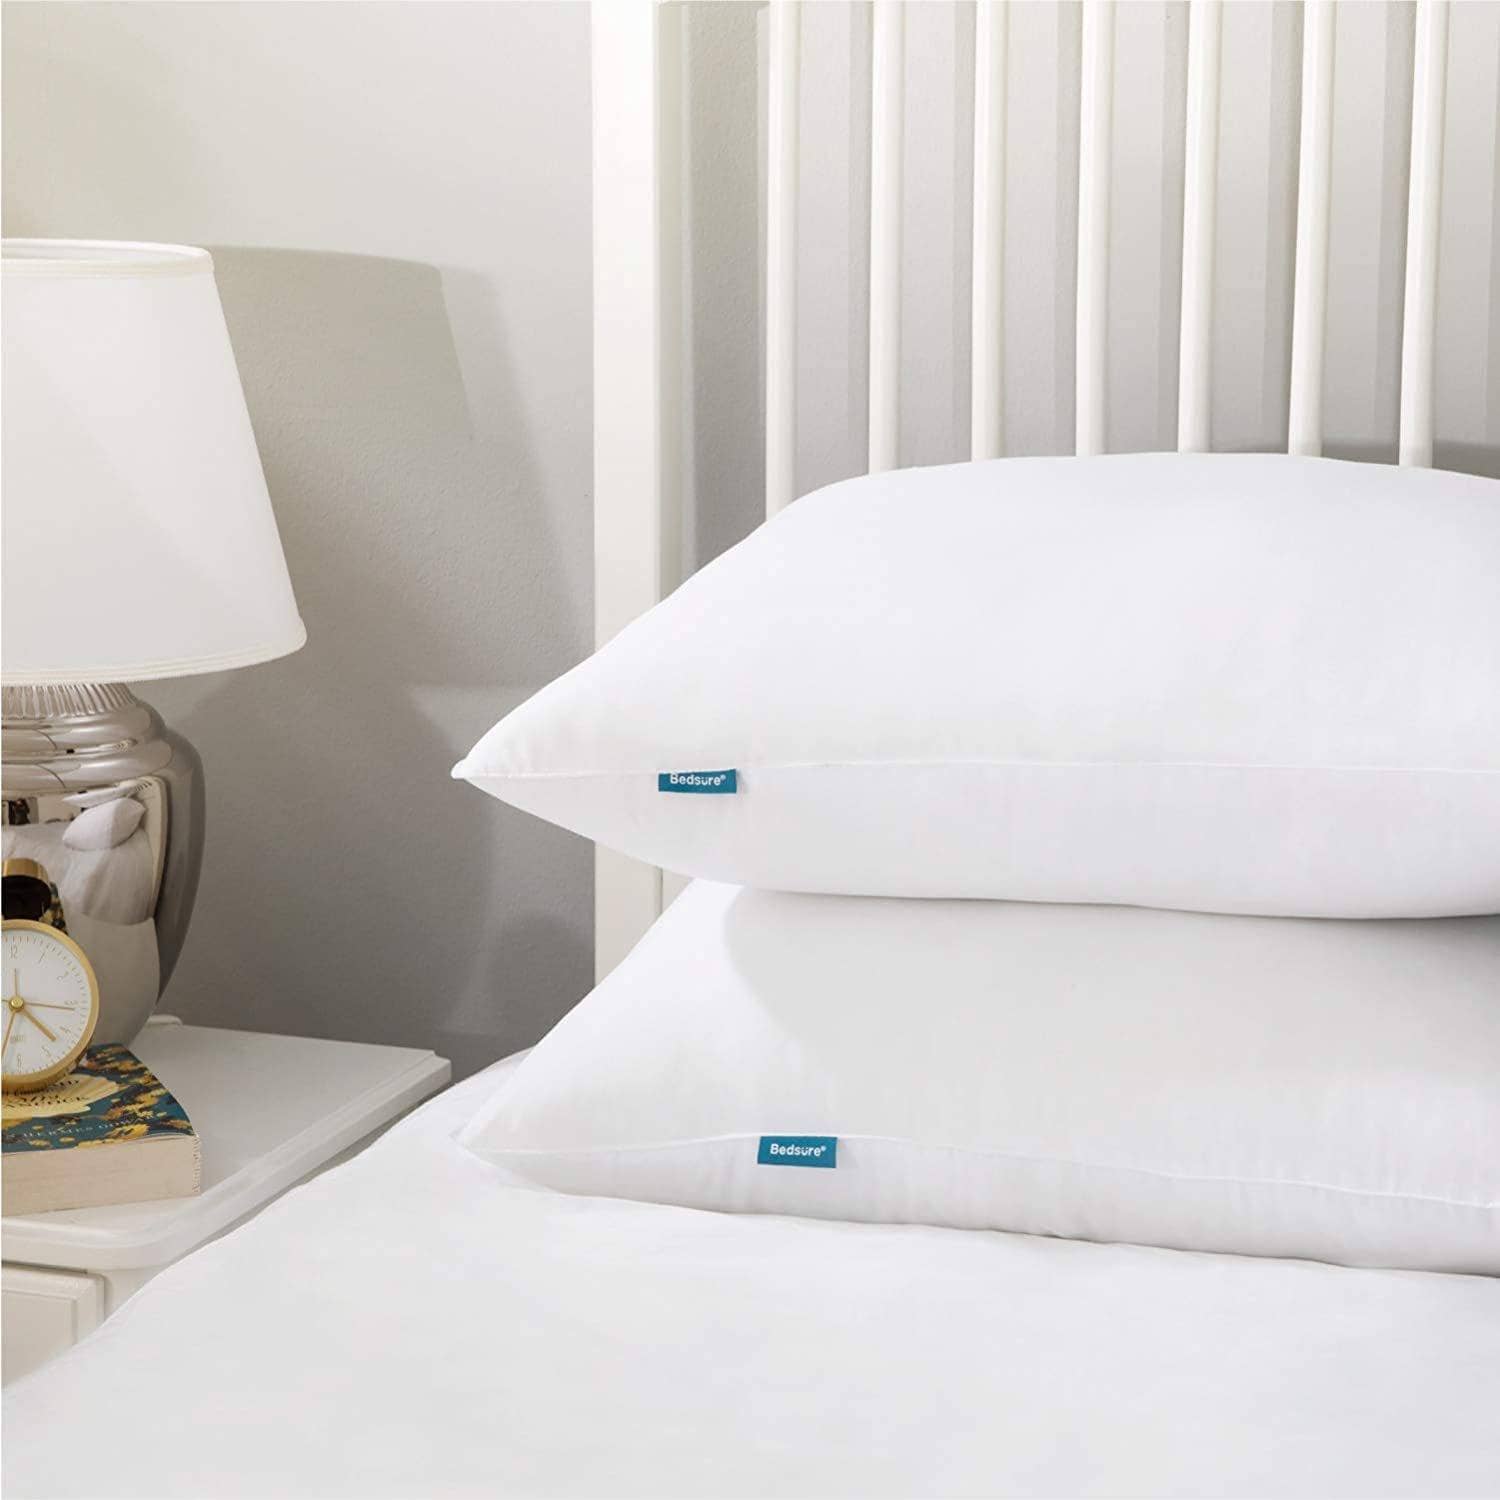 My Pillow Series Bed Pillow Premium Sleeping Bed Pillow Machine Washable -  2Pack